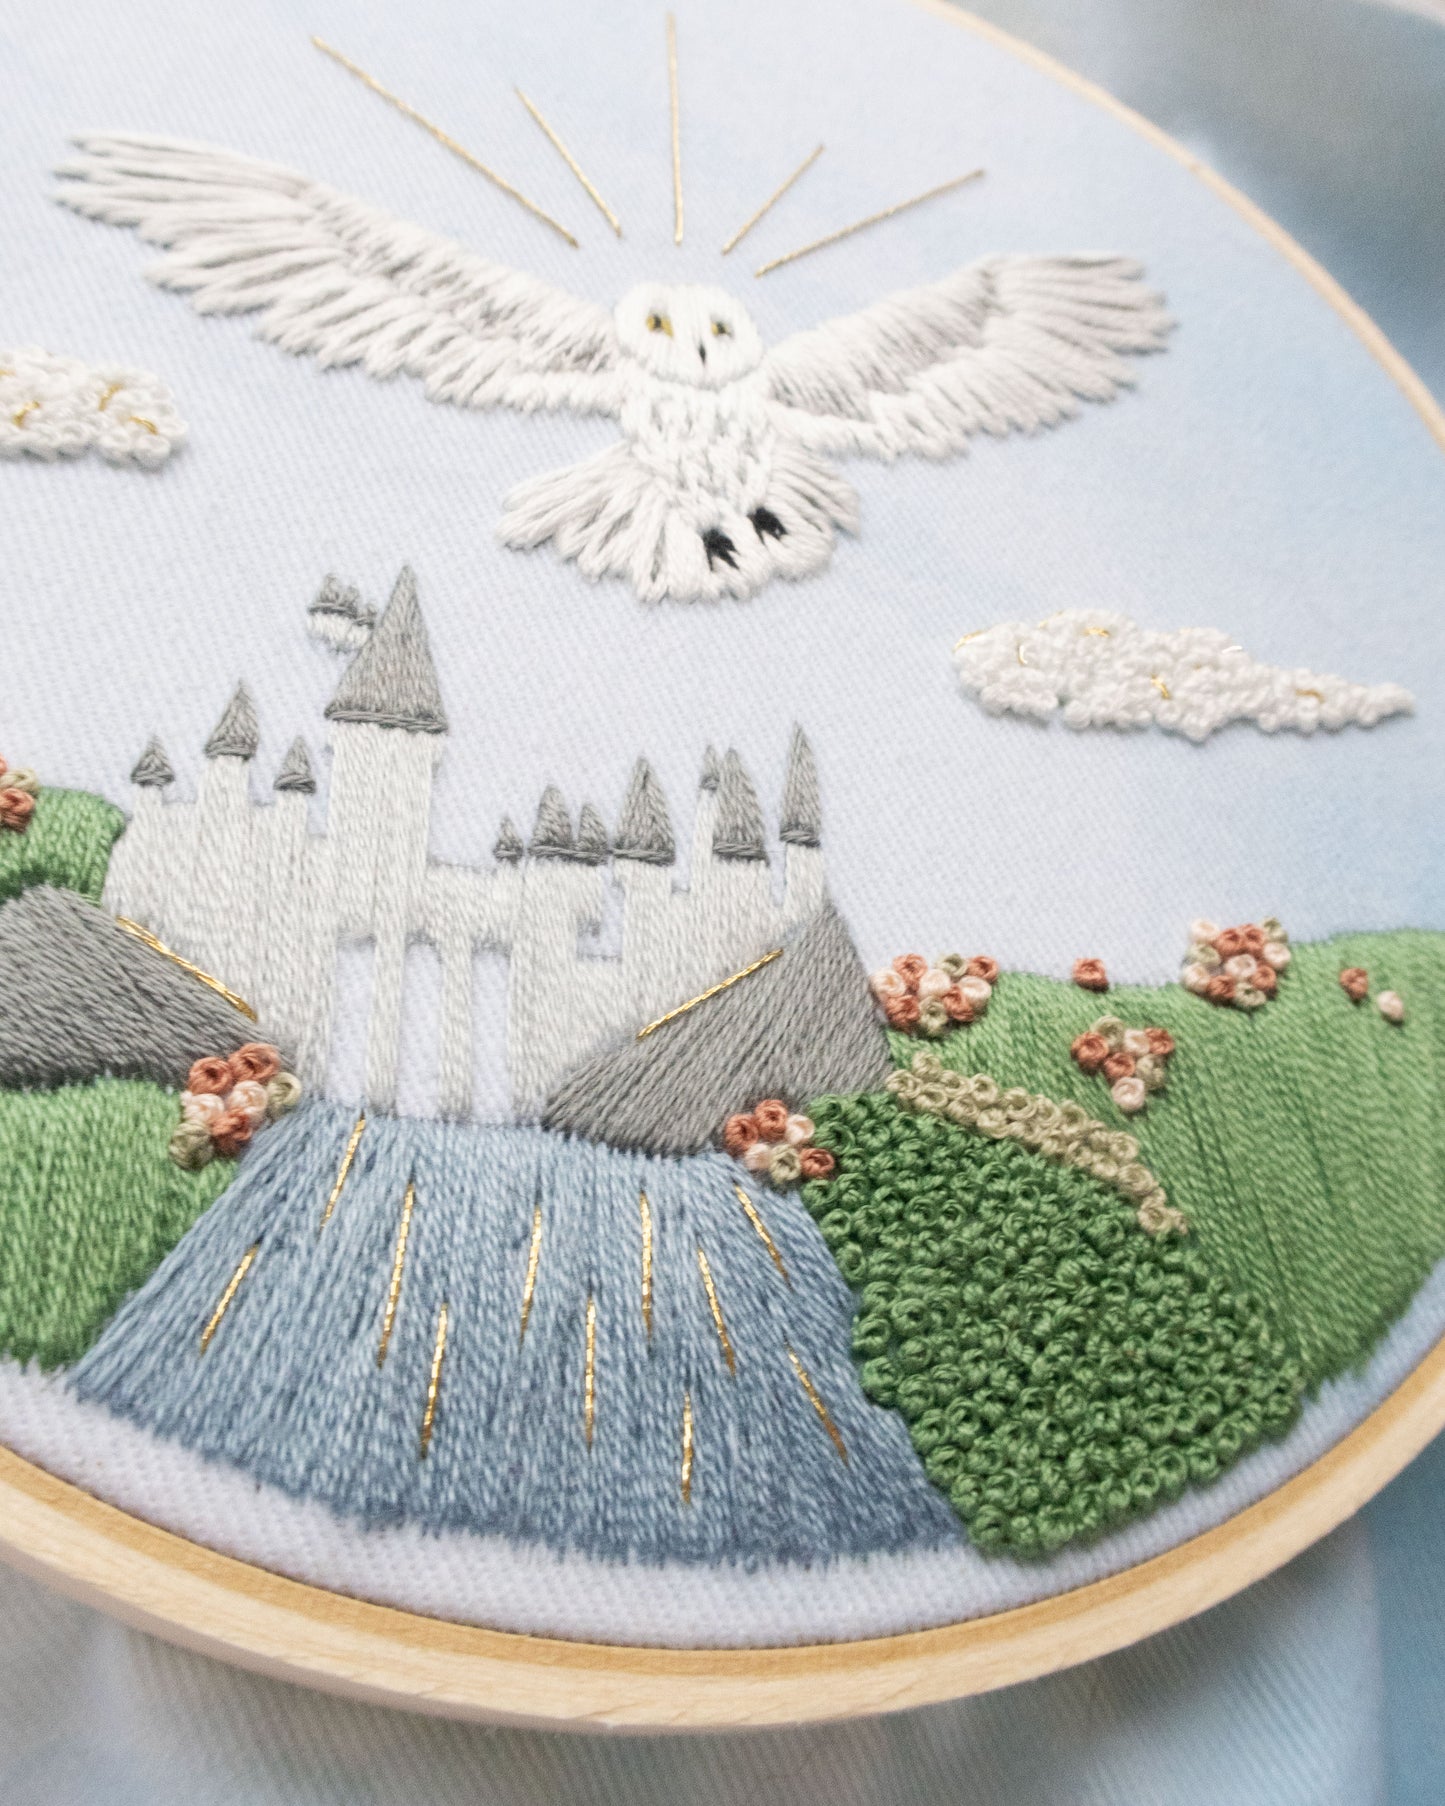 Spring Magical Owl Embroidery Kit close up details showing the green fields and castle and flowers and owl